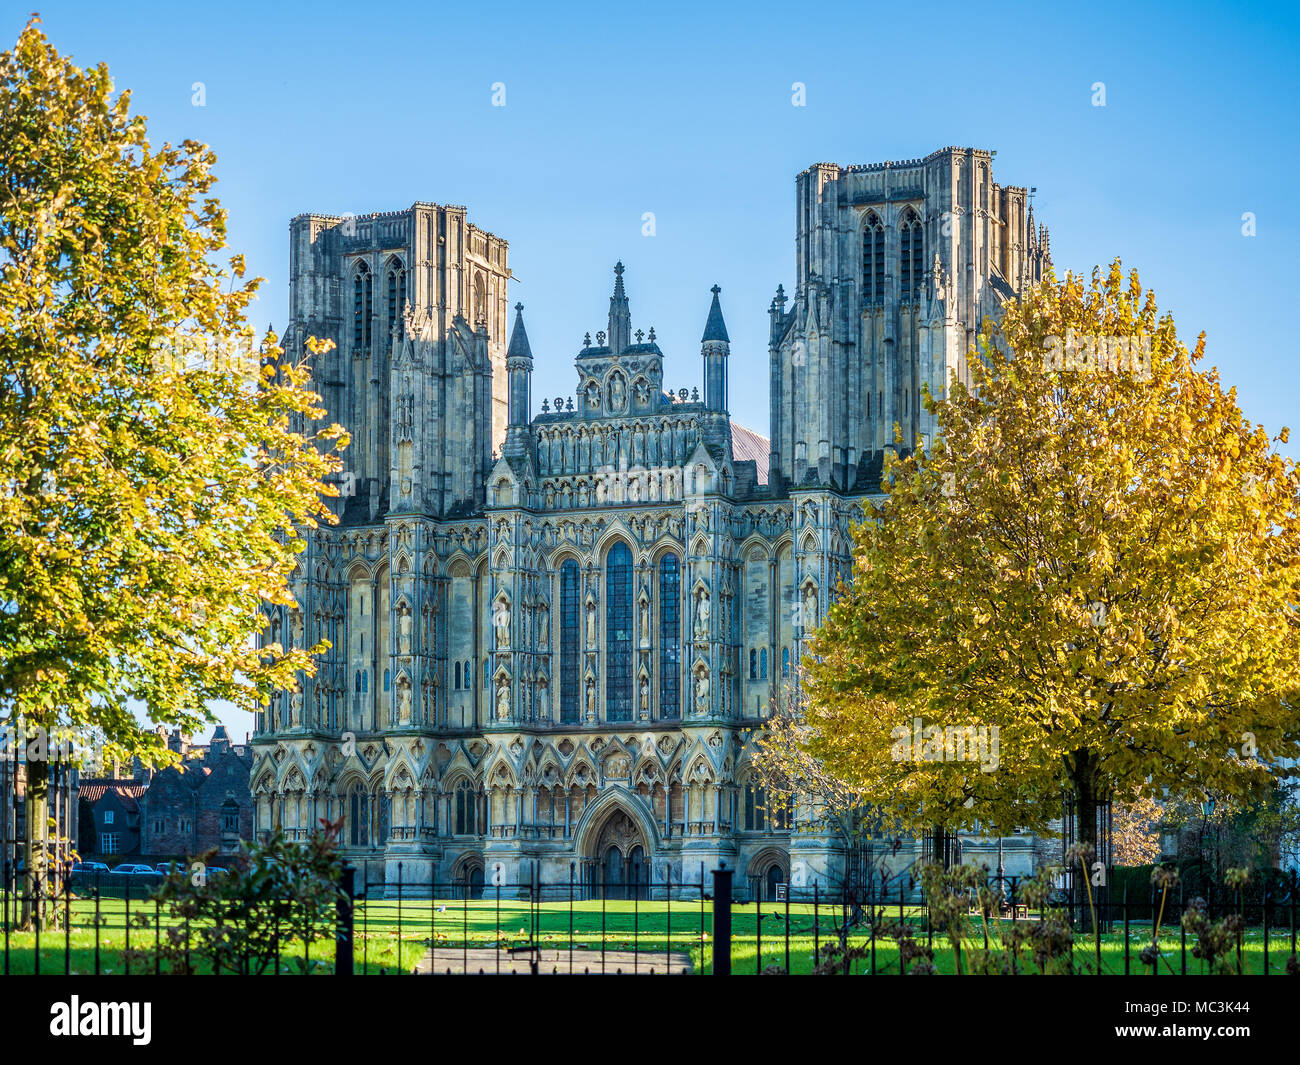 The Cathedral in Wells, England - the sammest city in the UK. Stock Photo